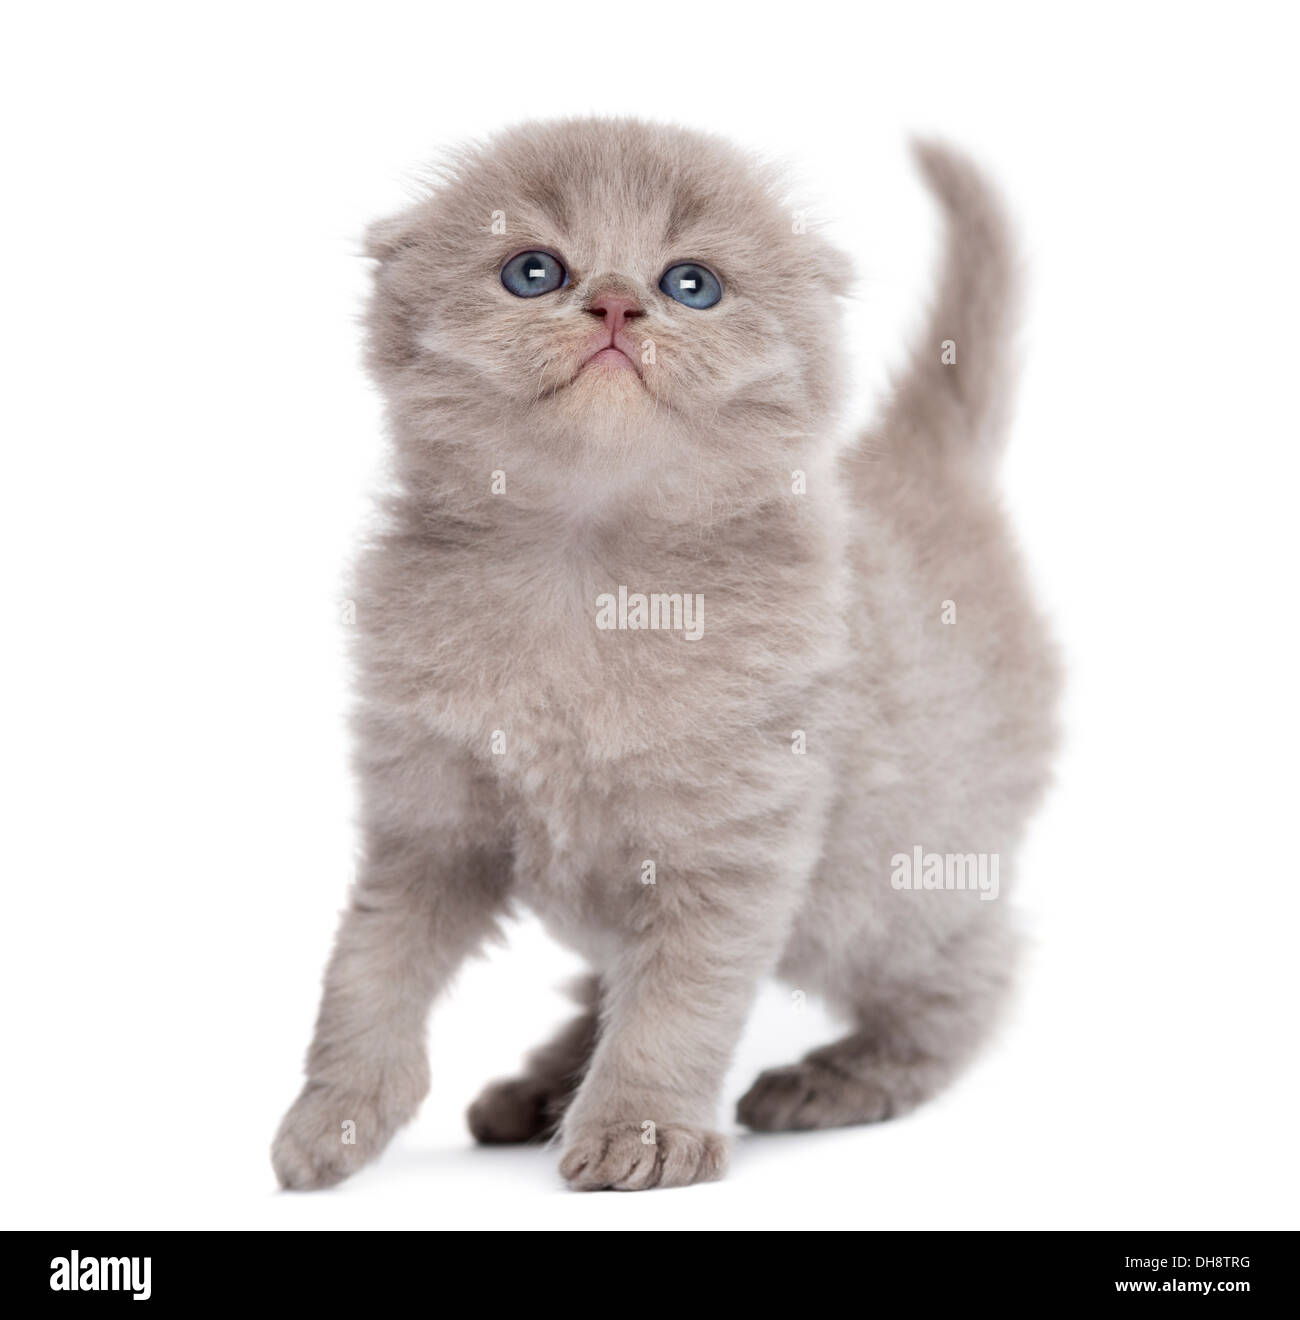 Highland fold chaton contre fond blanc Banque D'Images